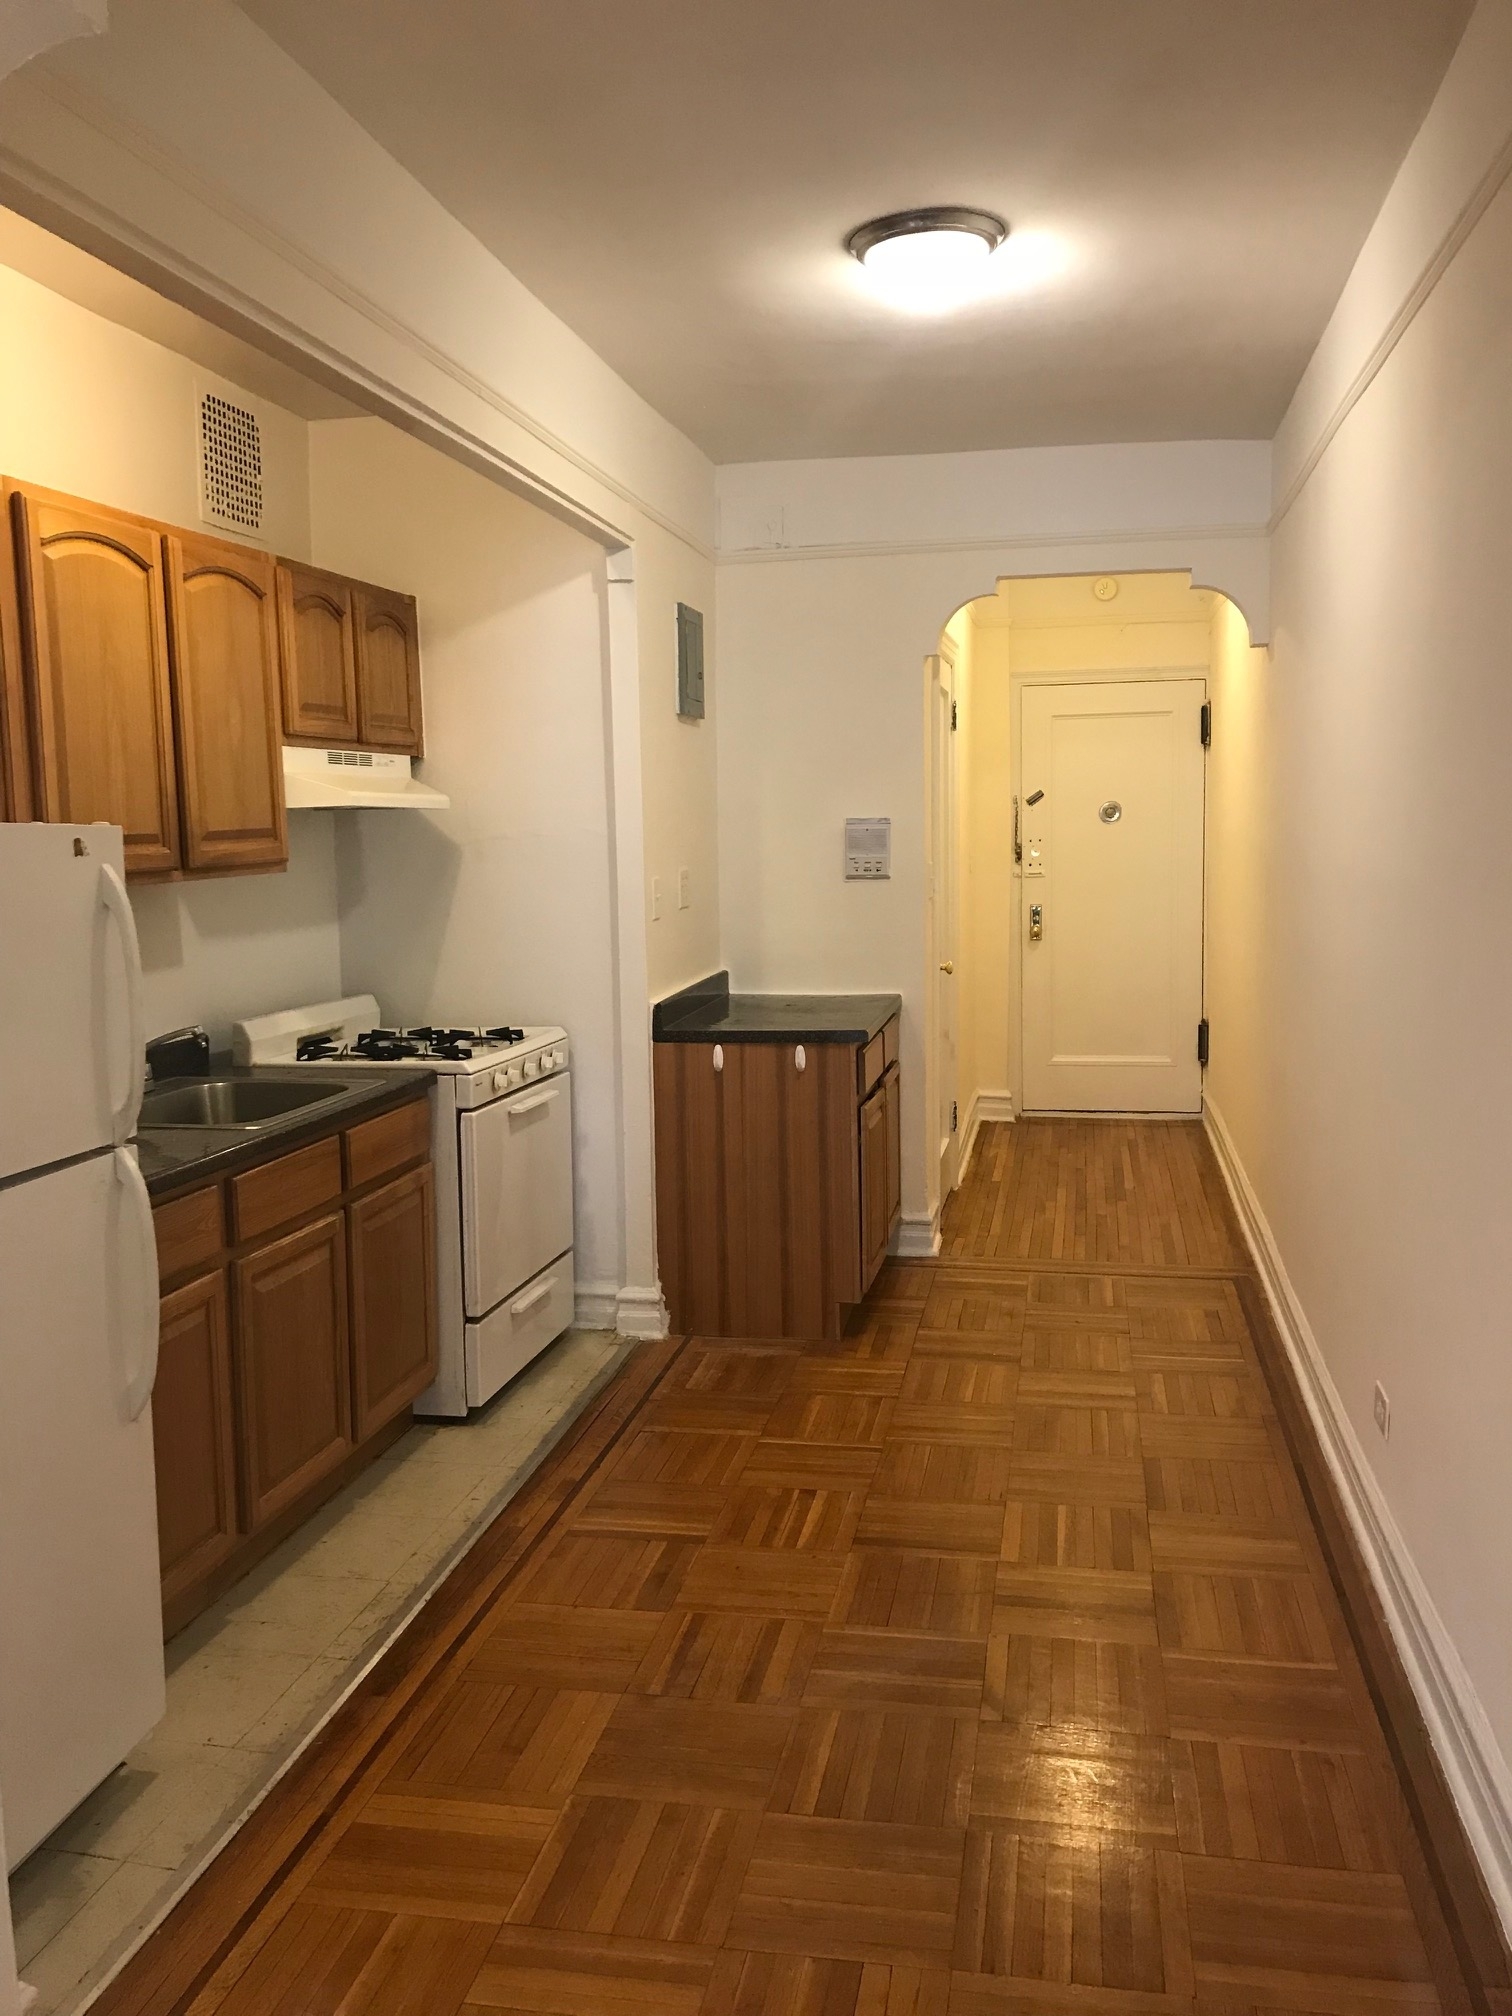 Apartment 108th Street  Queens, NY 11375, MLS-RD2026-6